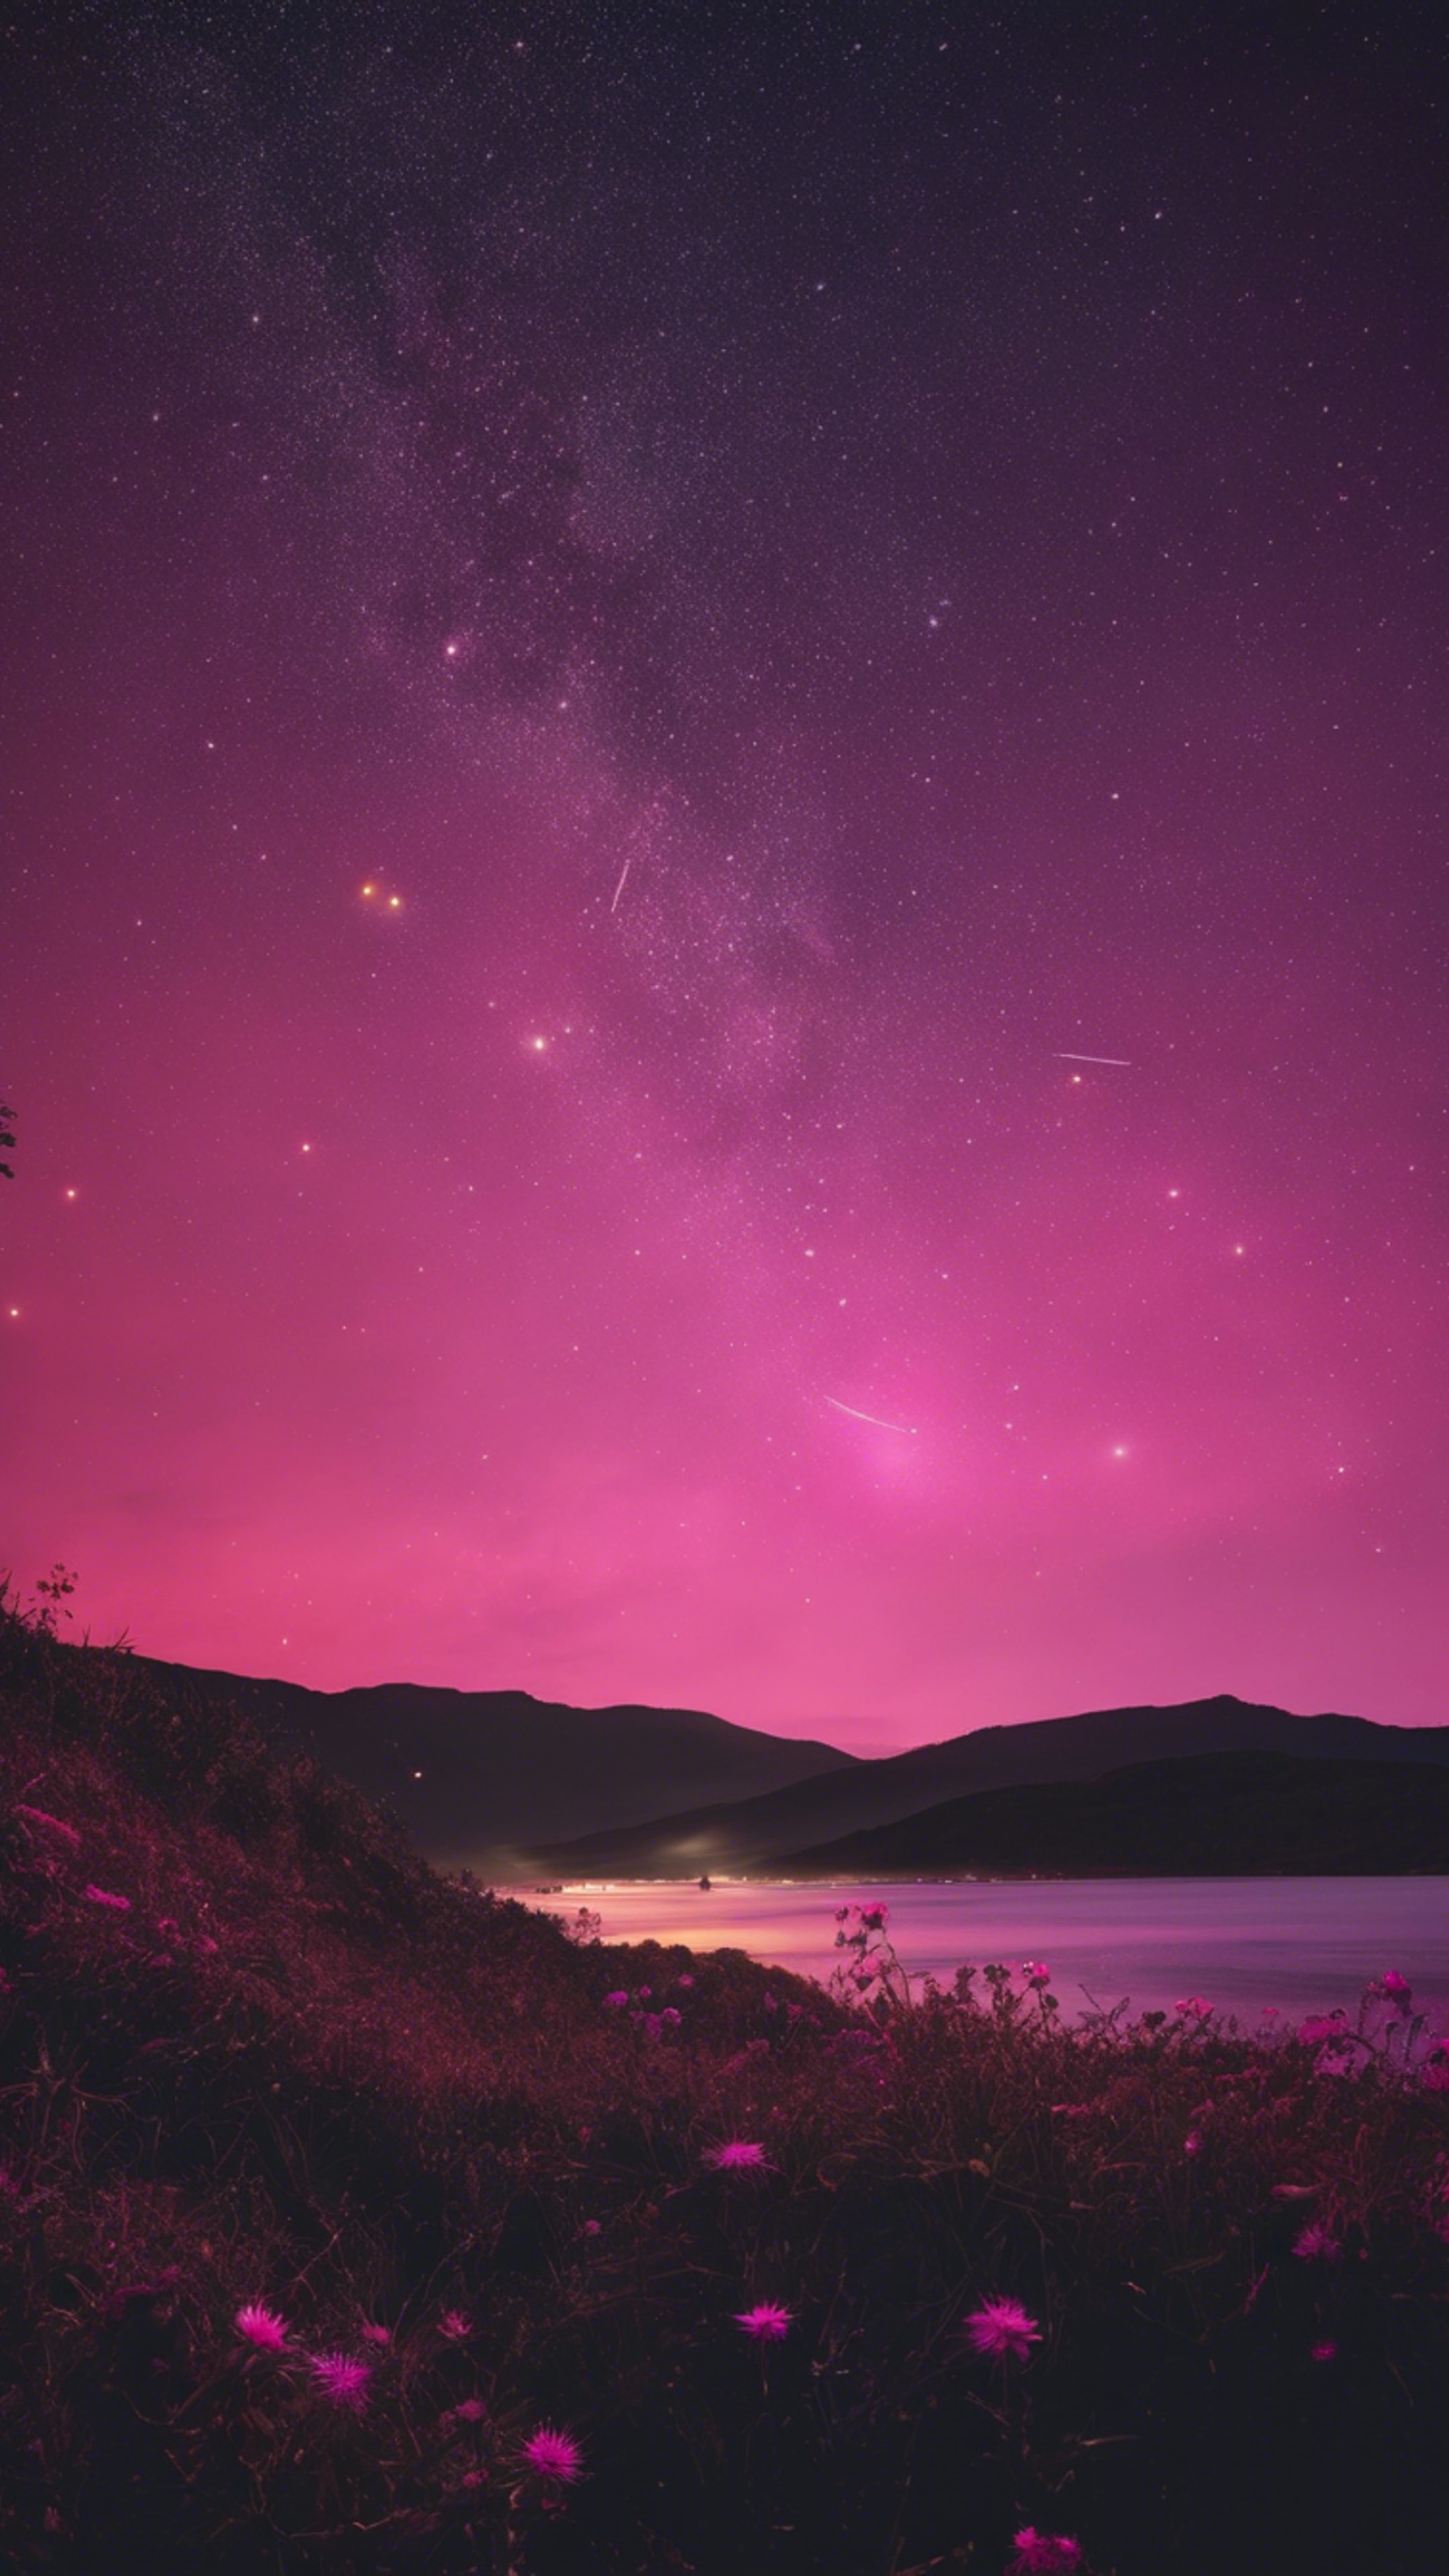 A shooting star glowing in a vibrant pink as it crosses the dark night sky. Tapet[c8fce7a9134e4e29a83b]